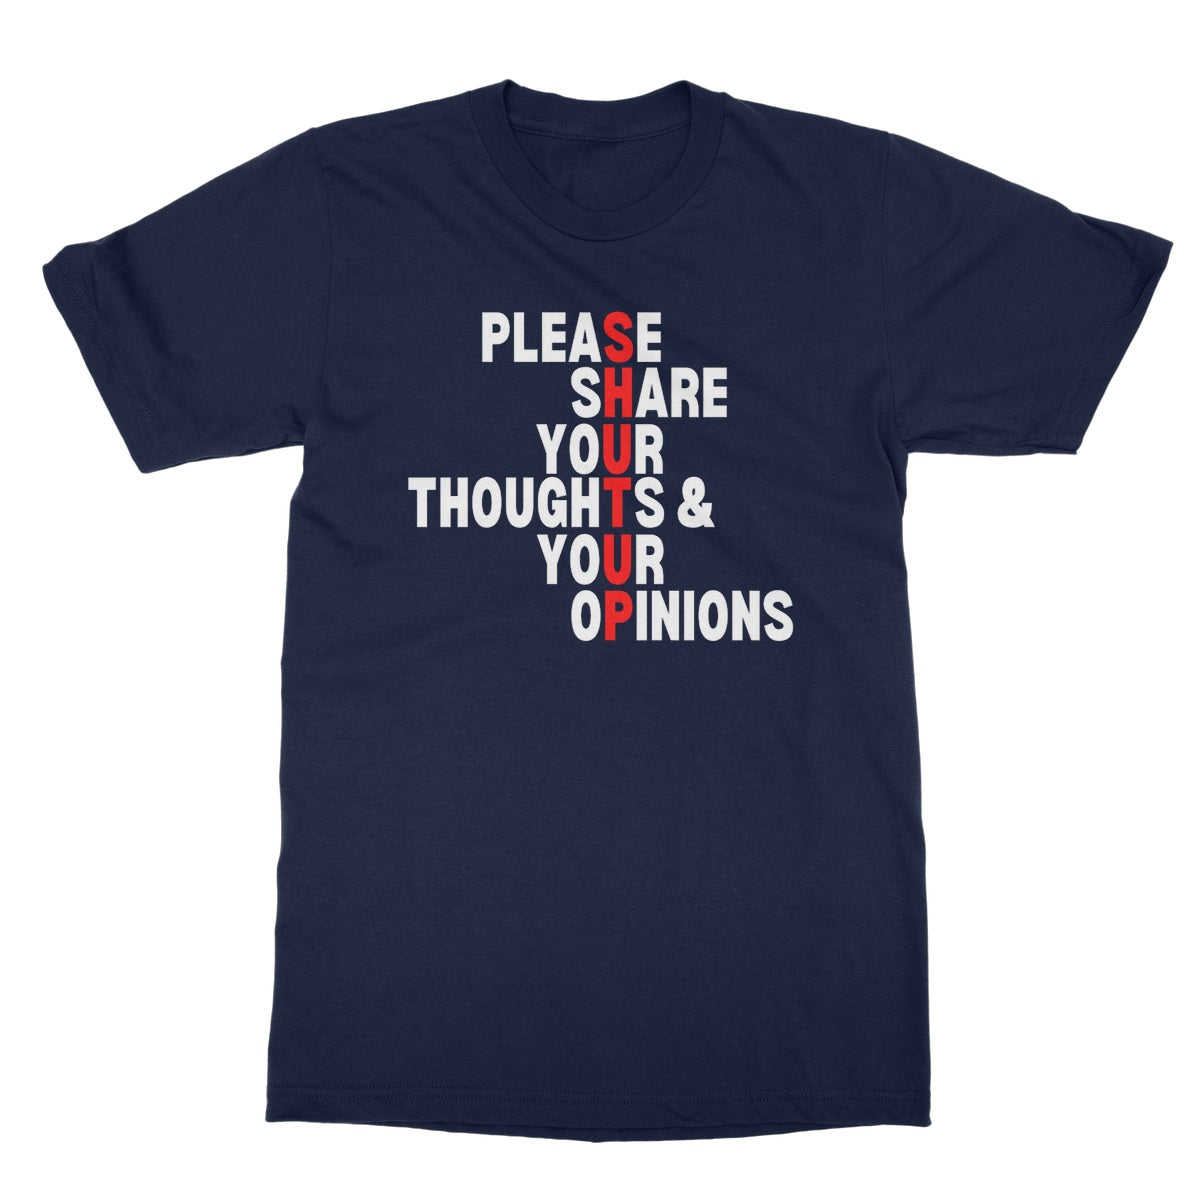 please share your thoughts and opinions t shirt navy